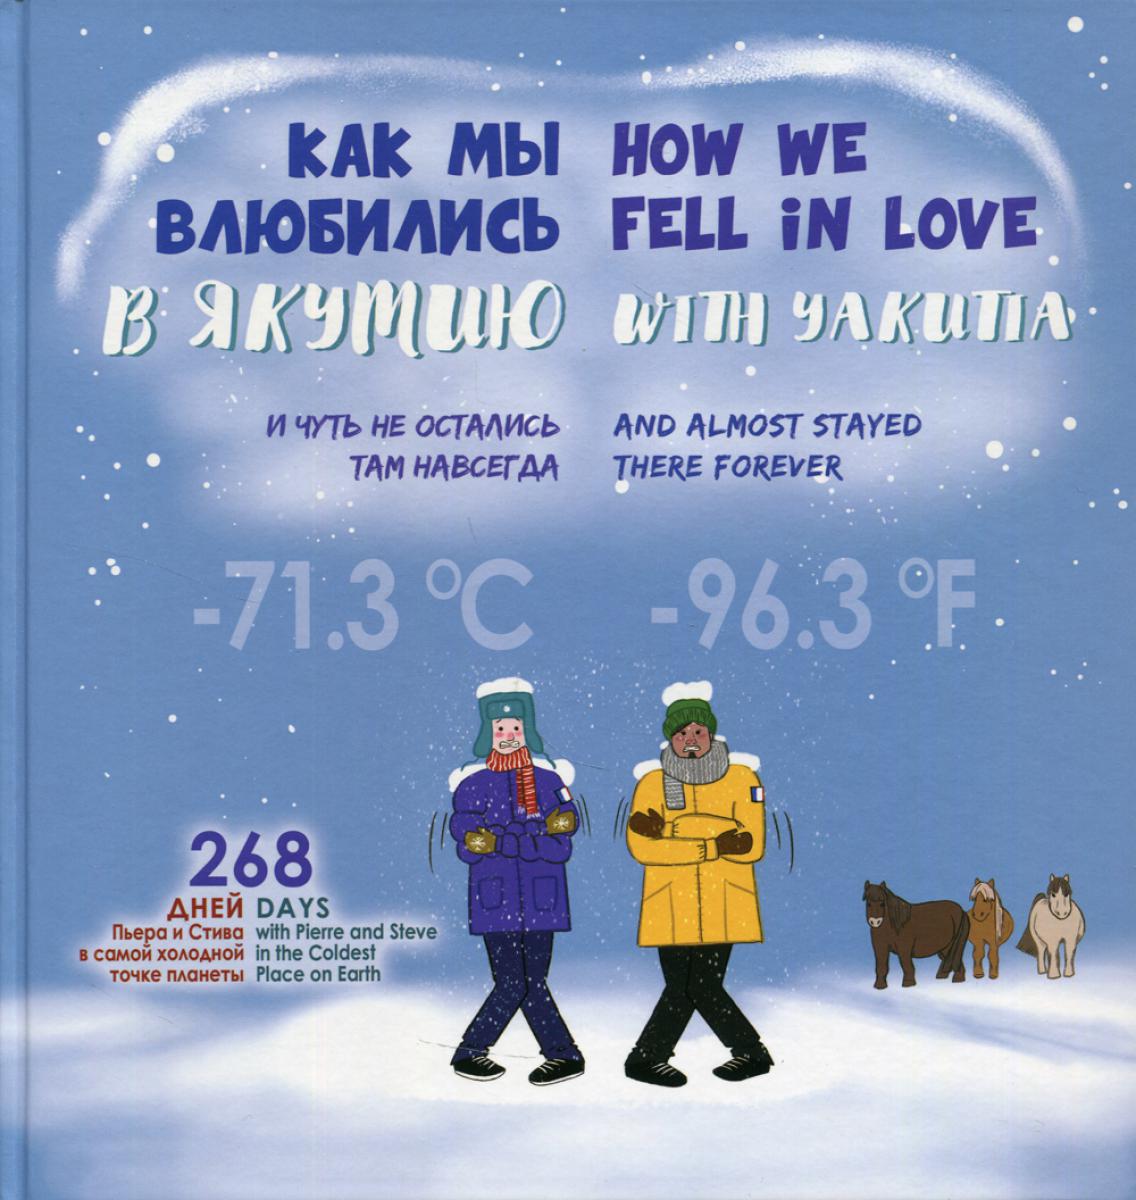 Как мы влюбились в Якутию и чуть не остались там навсегда = How we fell in love with Yakutia and almost stayed there forever.